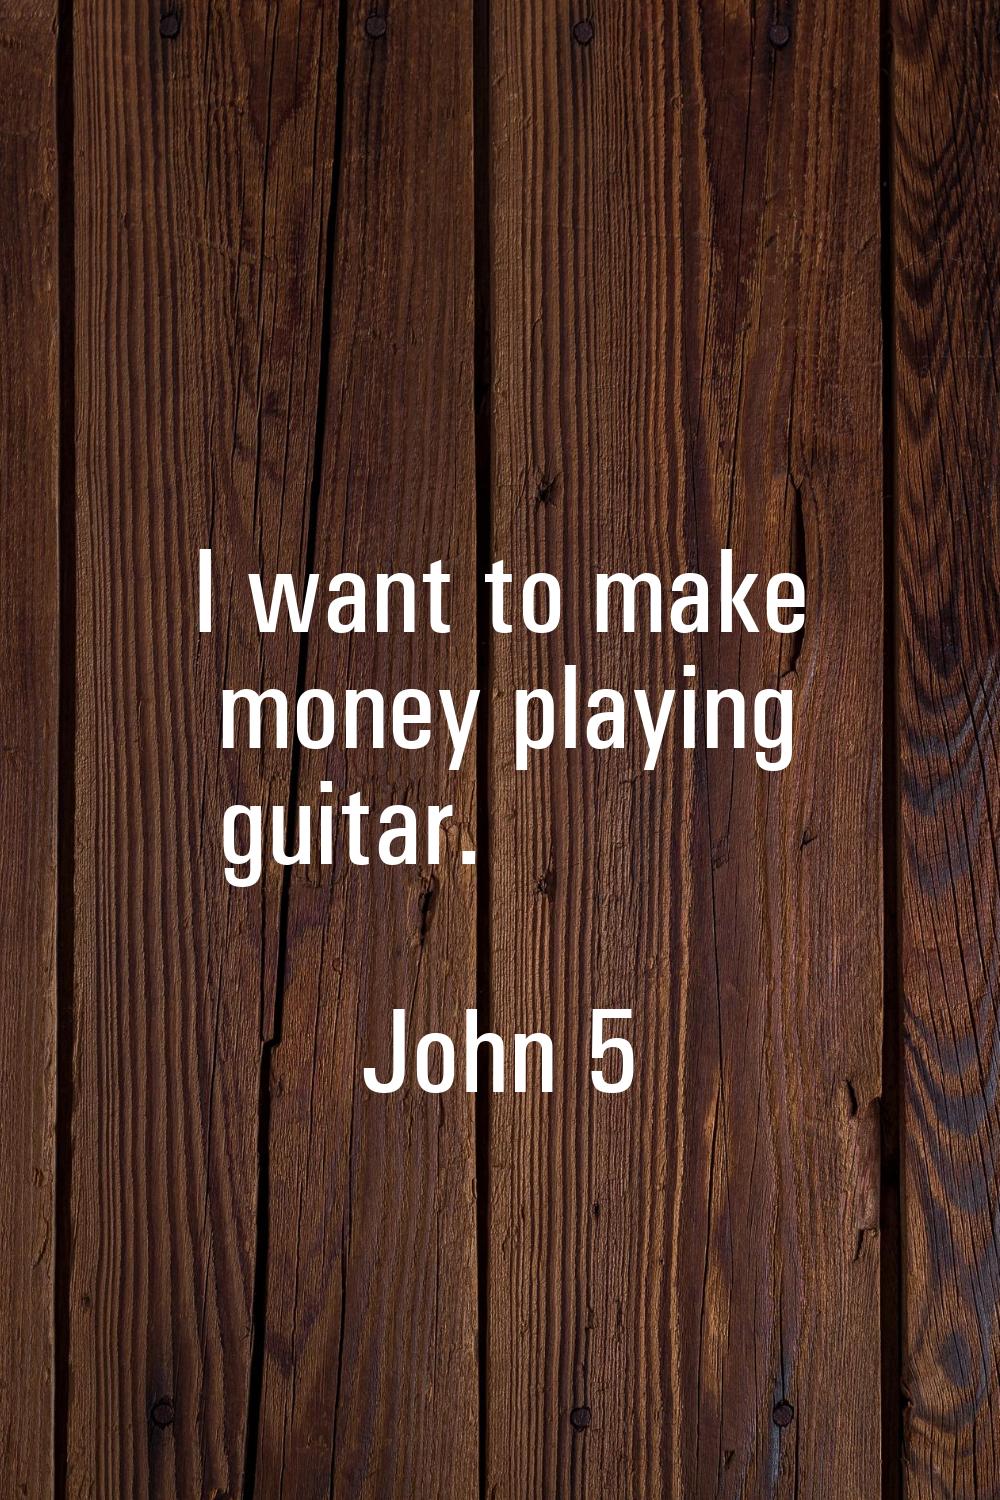 I want to make money playing guitar.